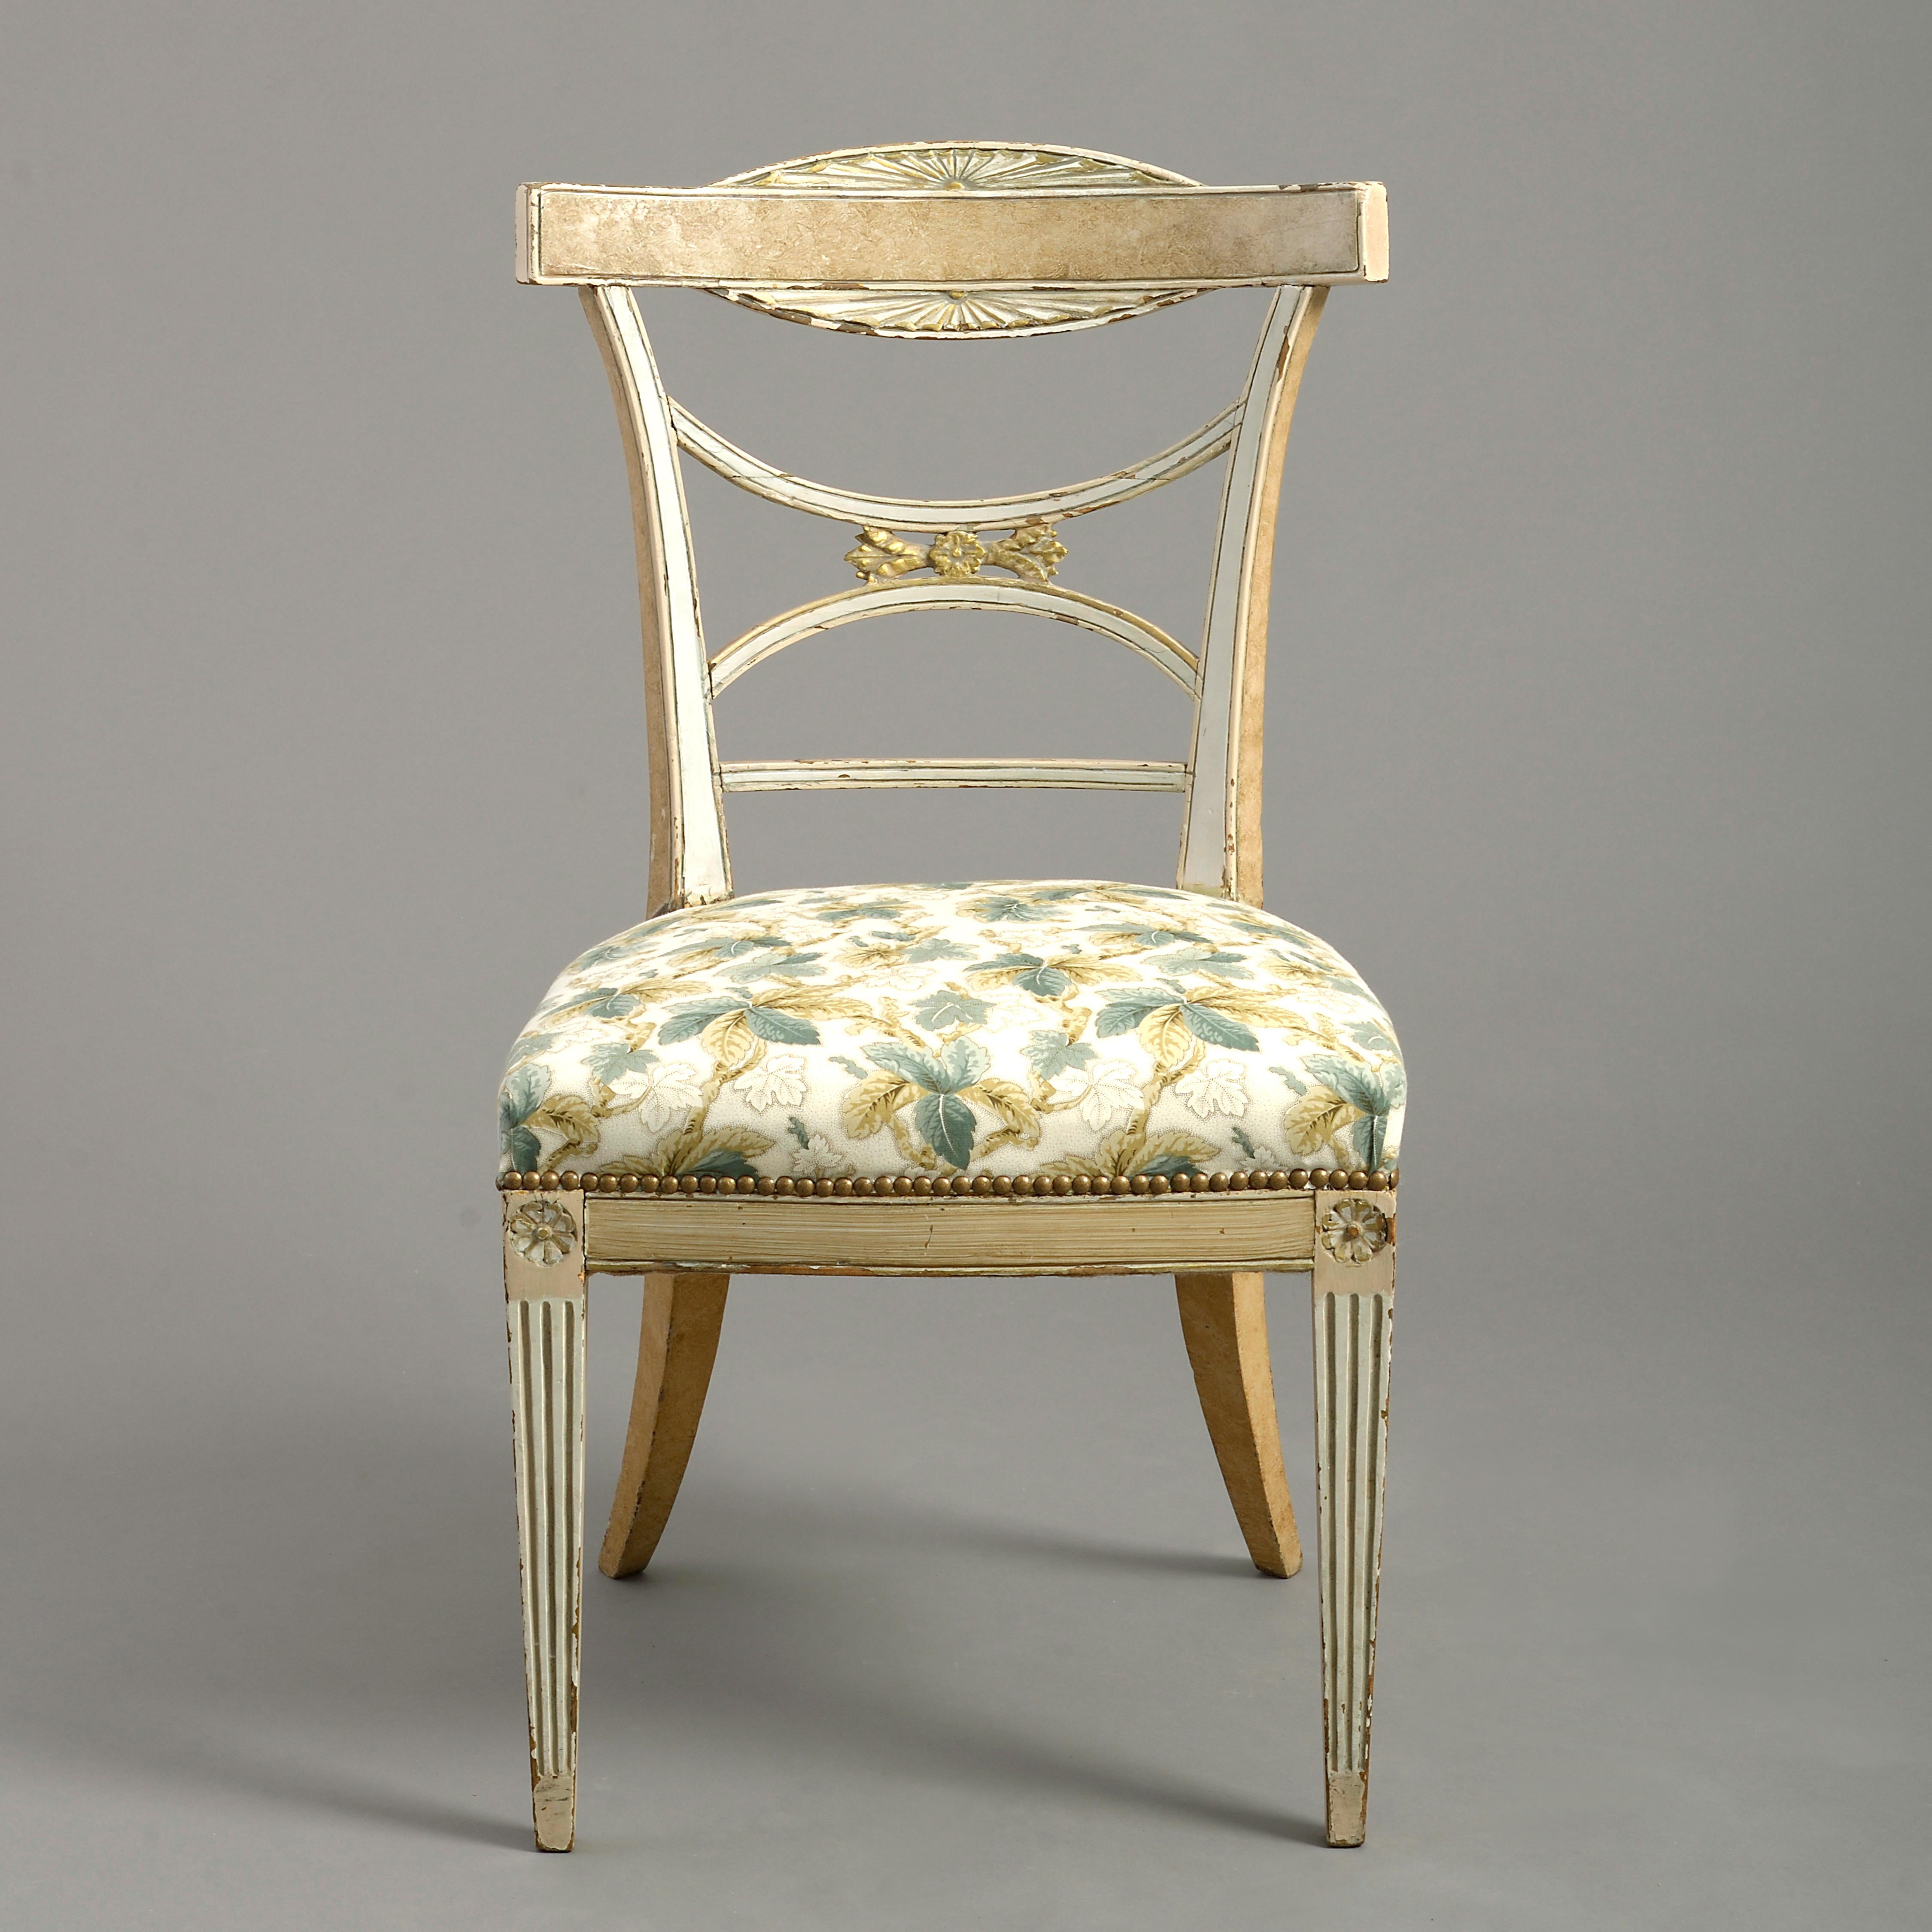 A fine early 19th century Gustavian period painted side chair in the classical manner, the shaped and tapering back set upon an over-stuffed seat, all raised upon square tapering fluted legs, headed with paterae.
   